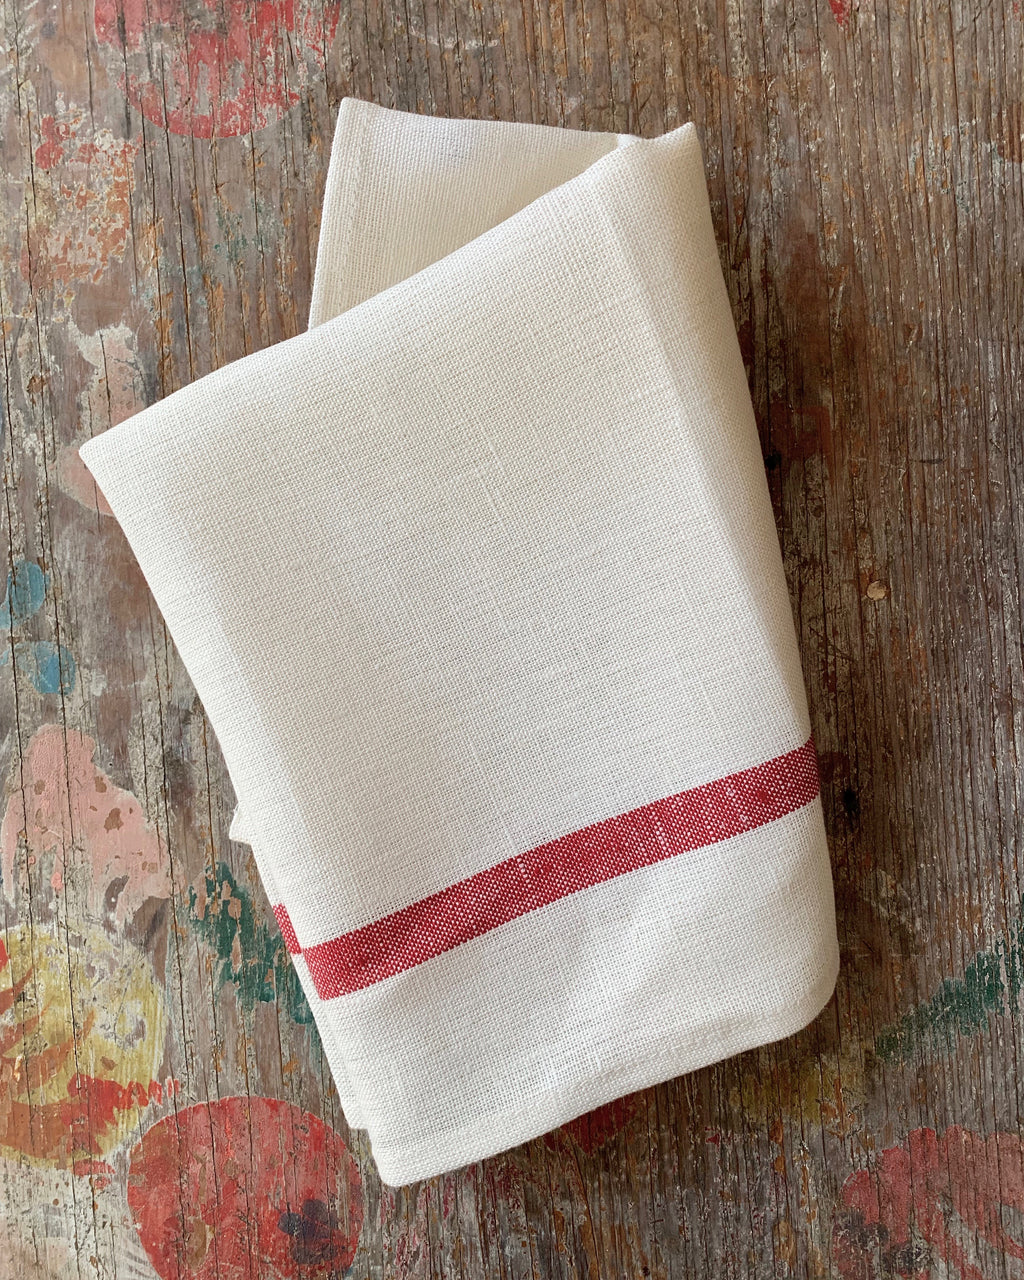 Thick Linen Kitchen Cloth: White with Red Stripe